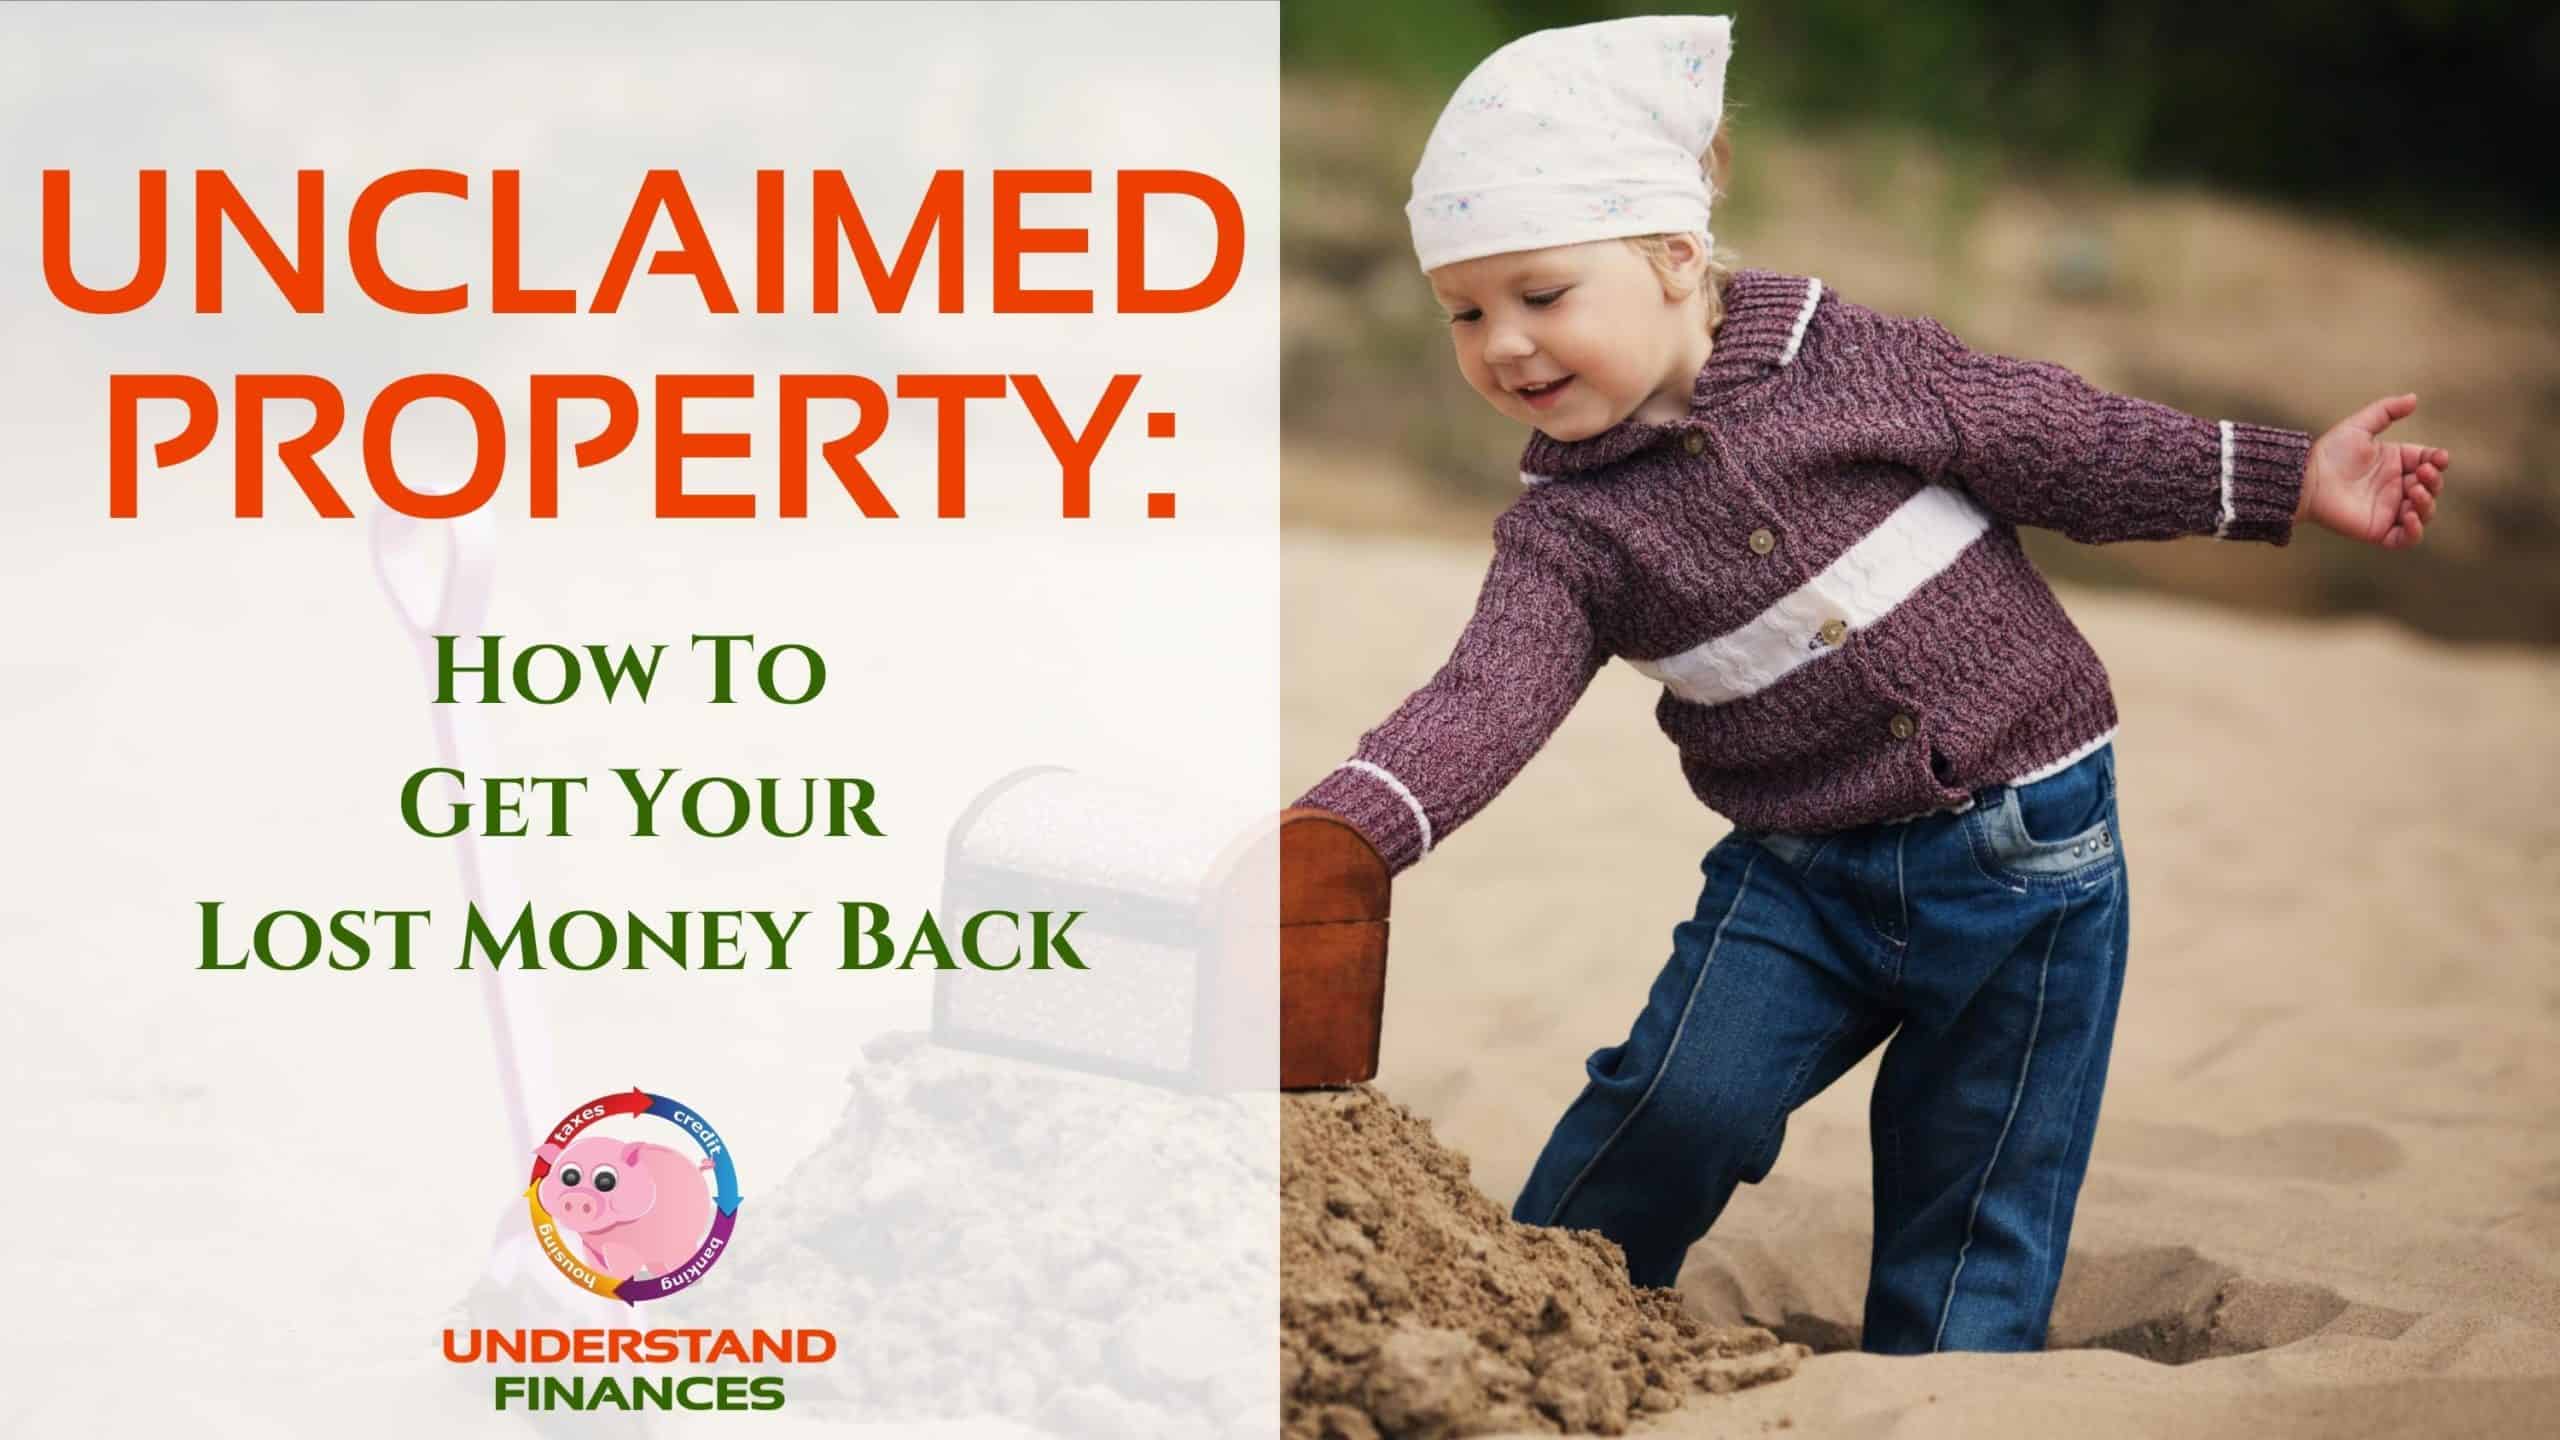 Unclaimed Property: How To Get Your Lost Money Back